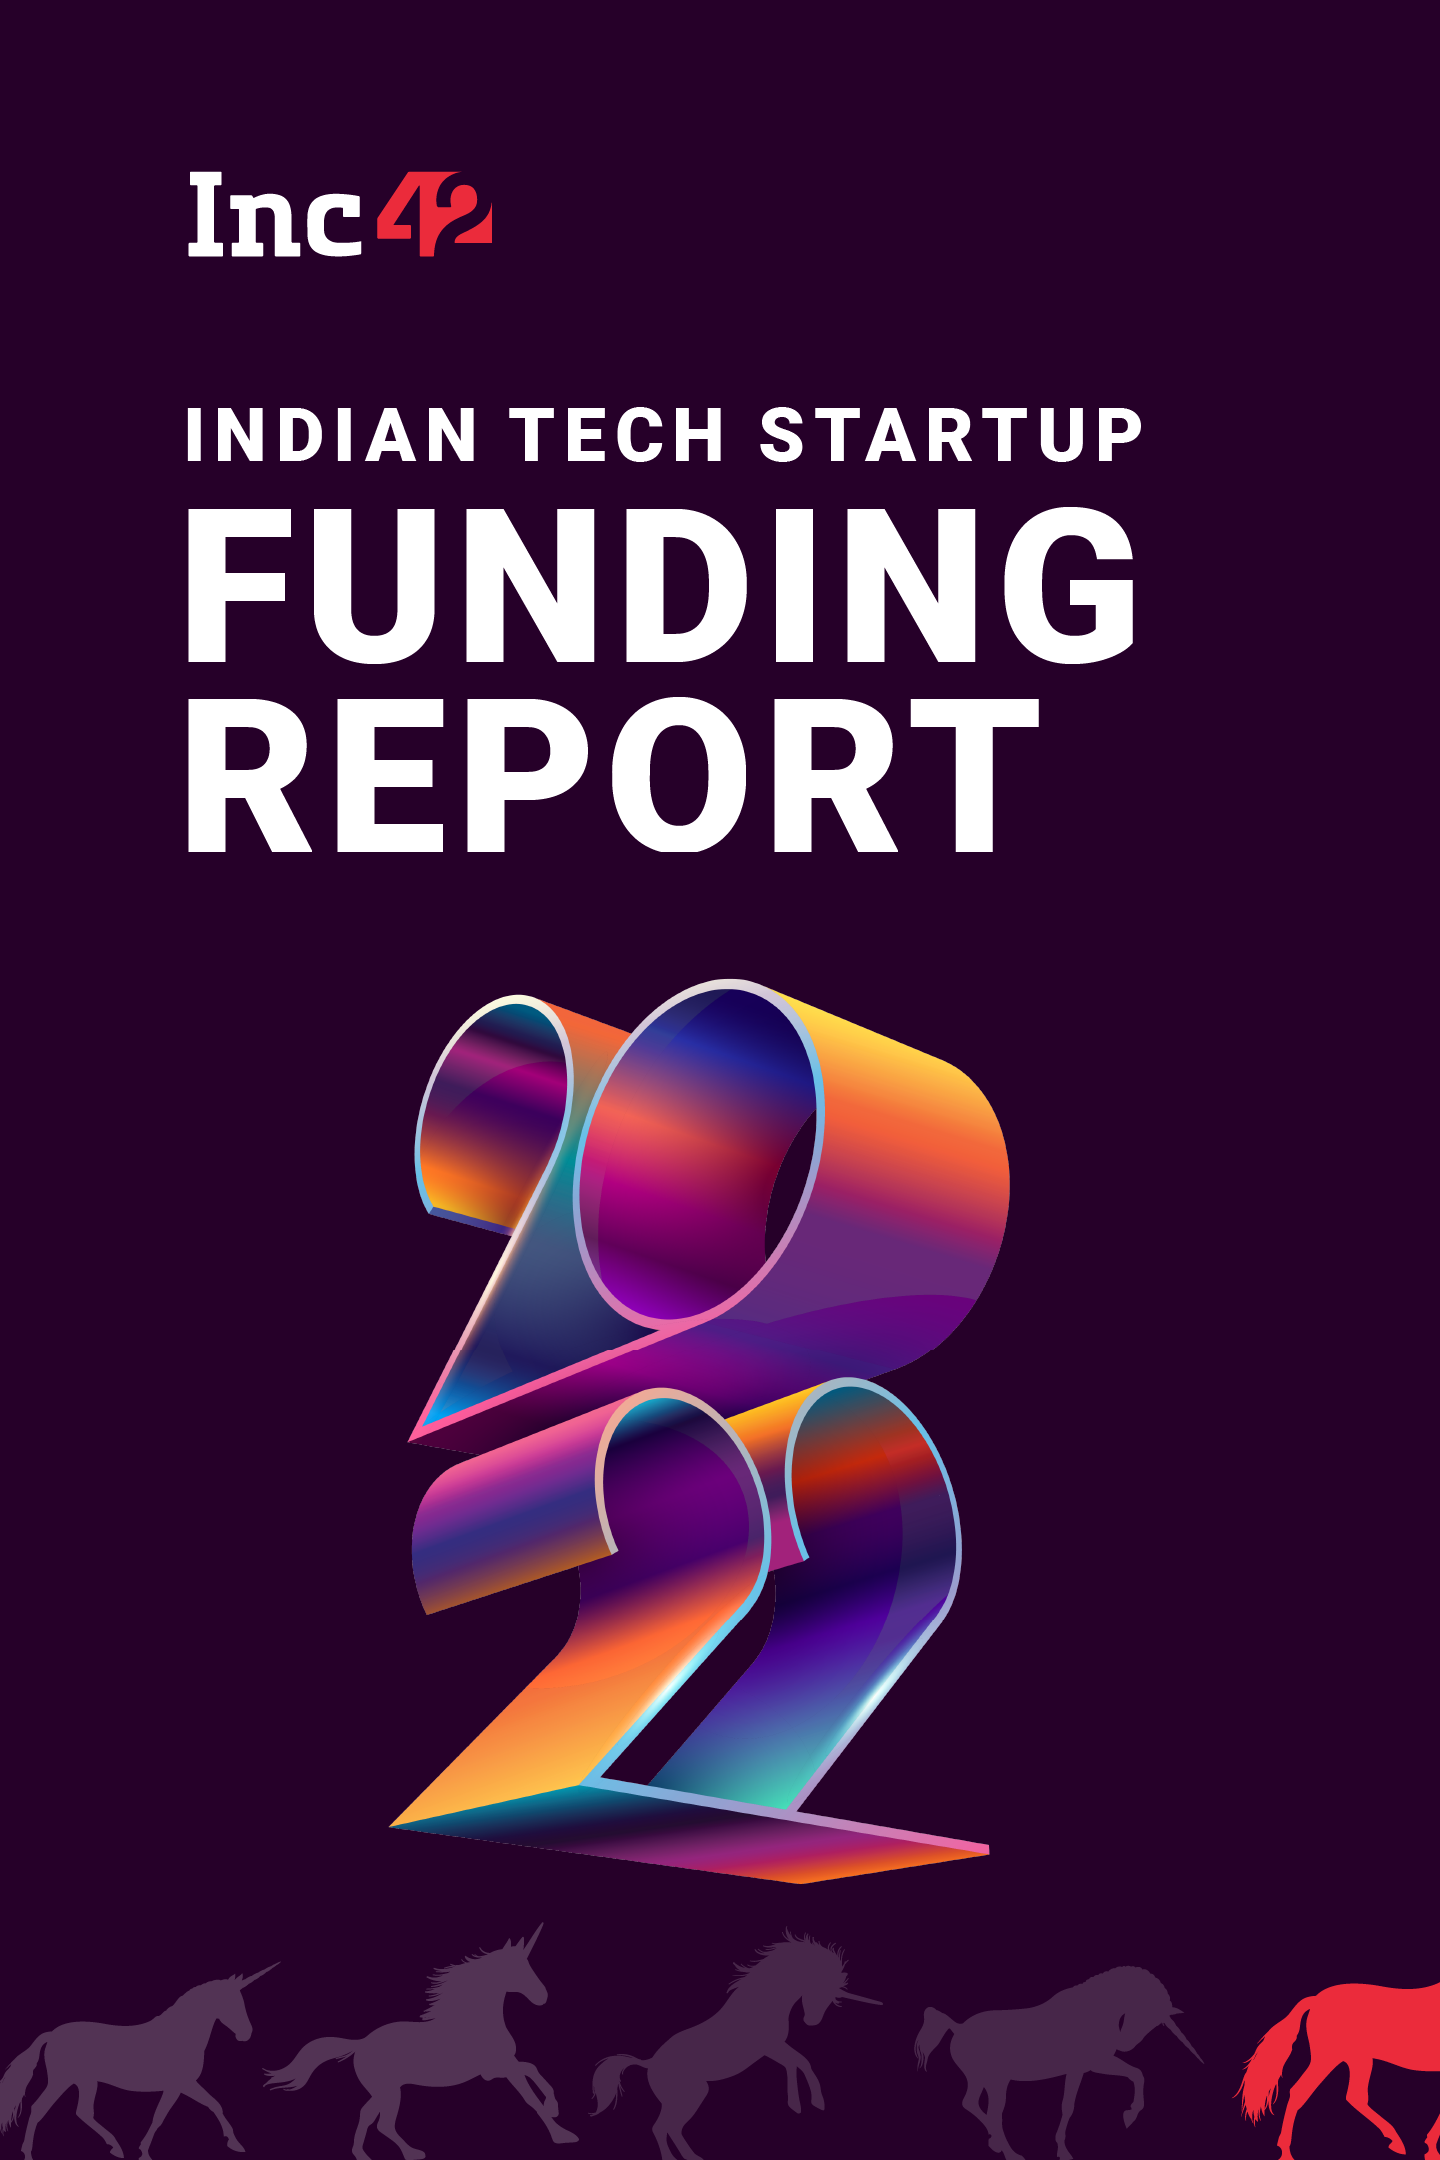 Indian Tech Startup Funding Report 2022